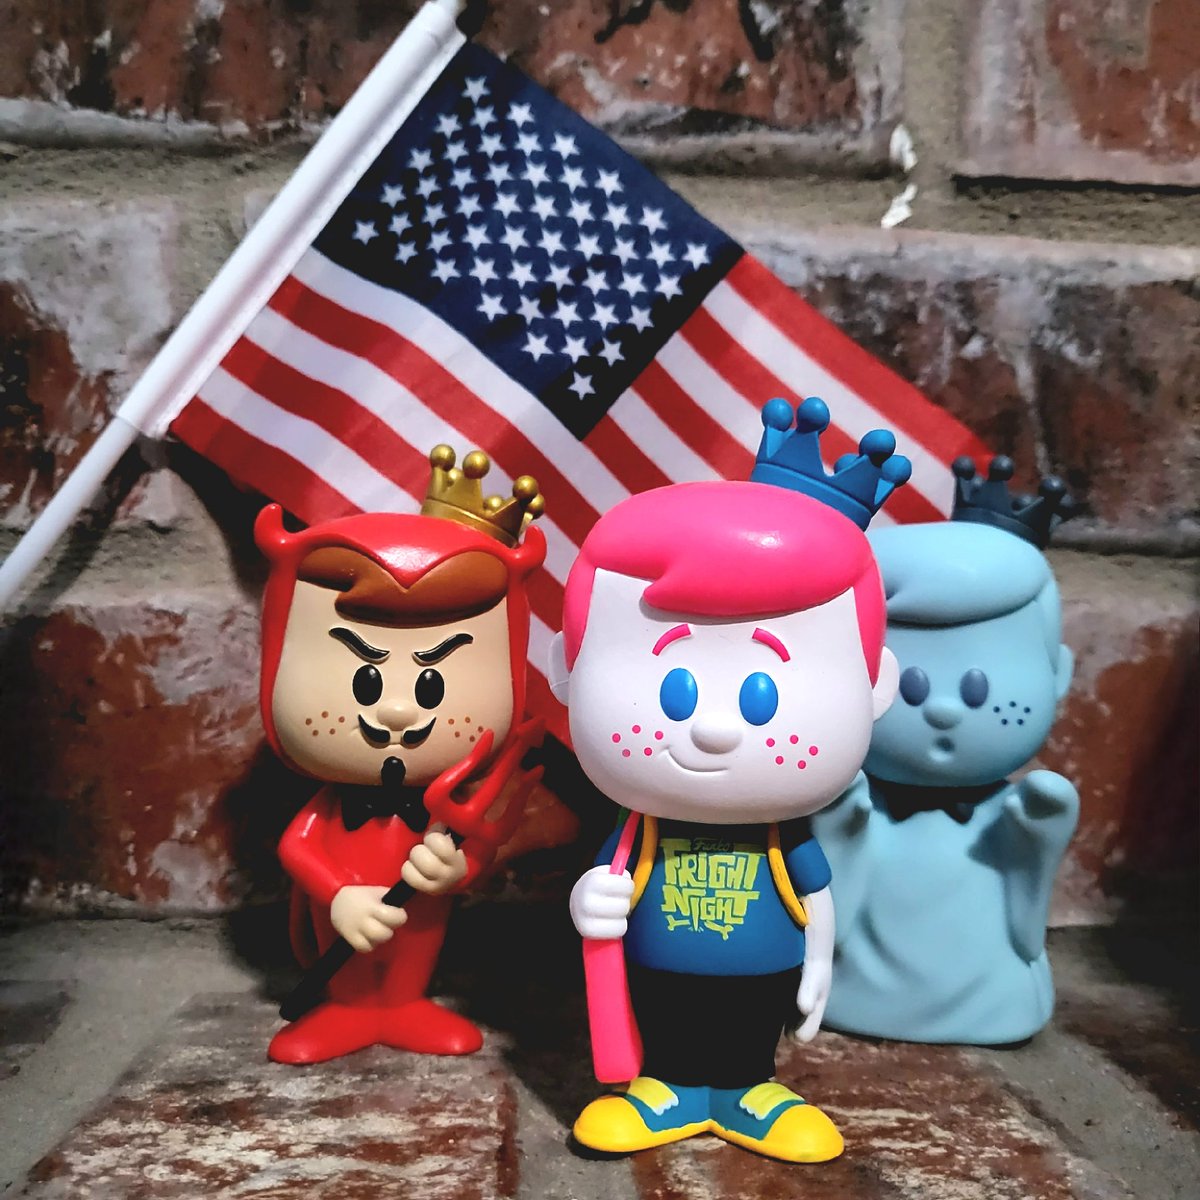 Happy #4thofJuly    !

Time for some Red, White, and Booo.

@OriginalFunko
#funkophotography #funkopopcollection #funkopopcollector #funkoFunatic #funkofantic #fotw #FunkoFamily #funko #originalfunko #myfunkostory 
 #poptwinstuesday